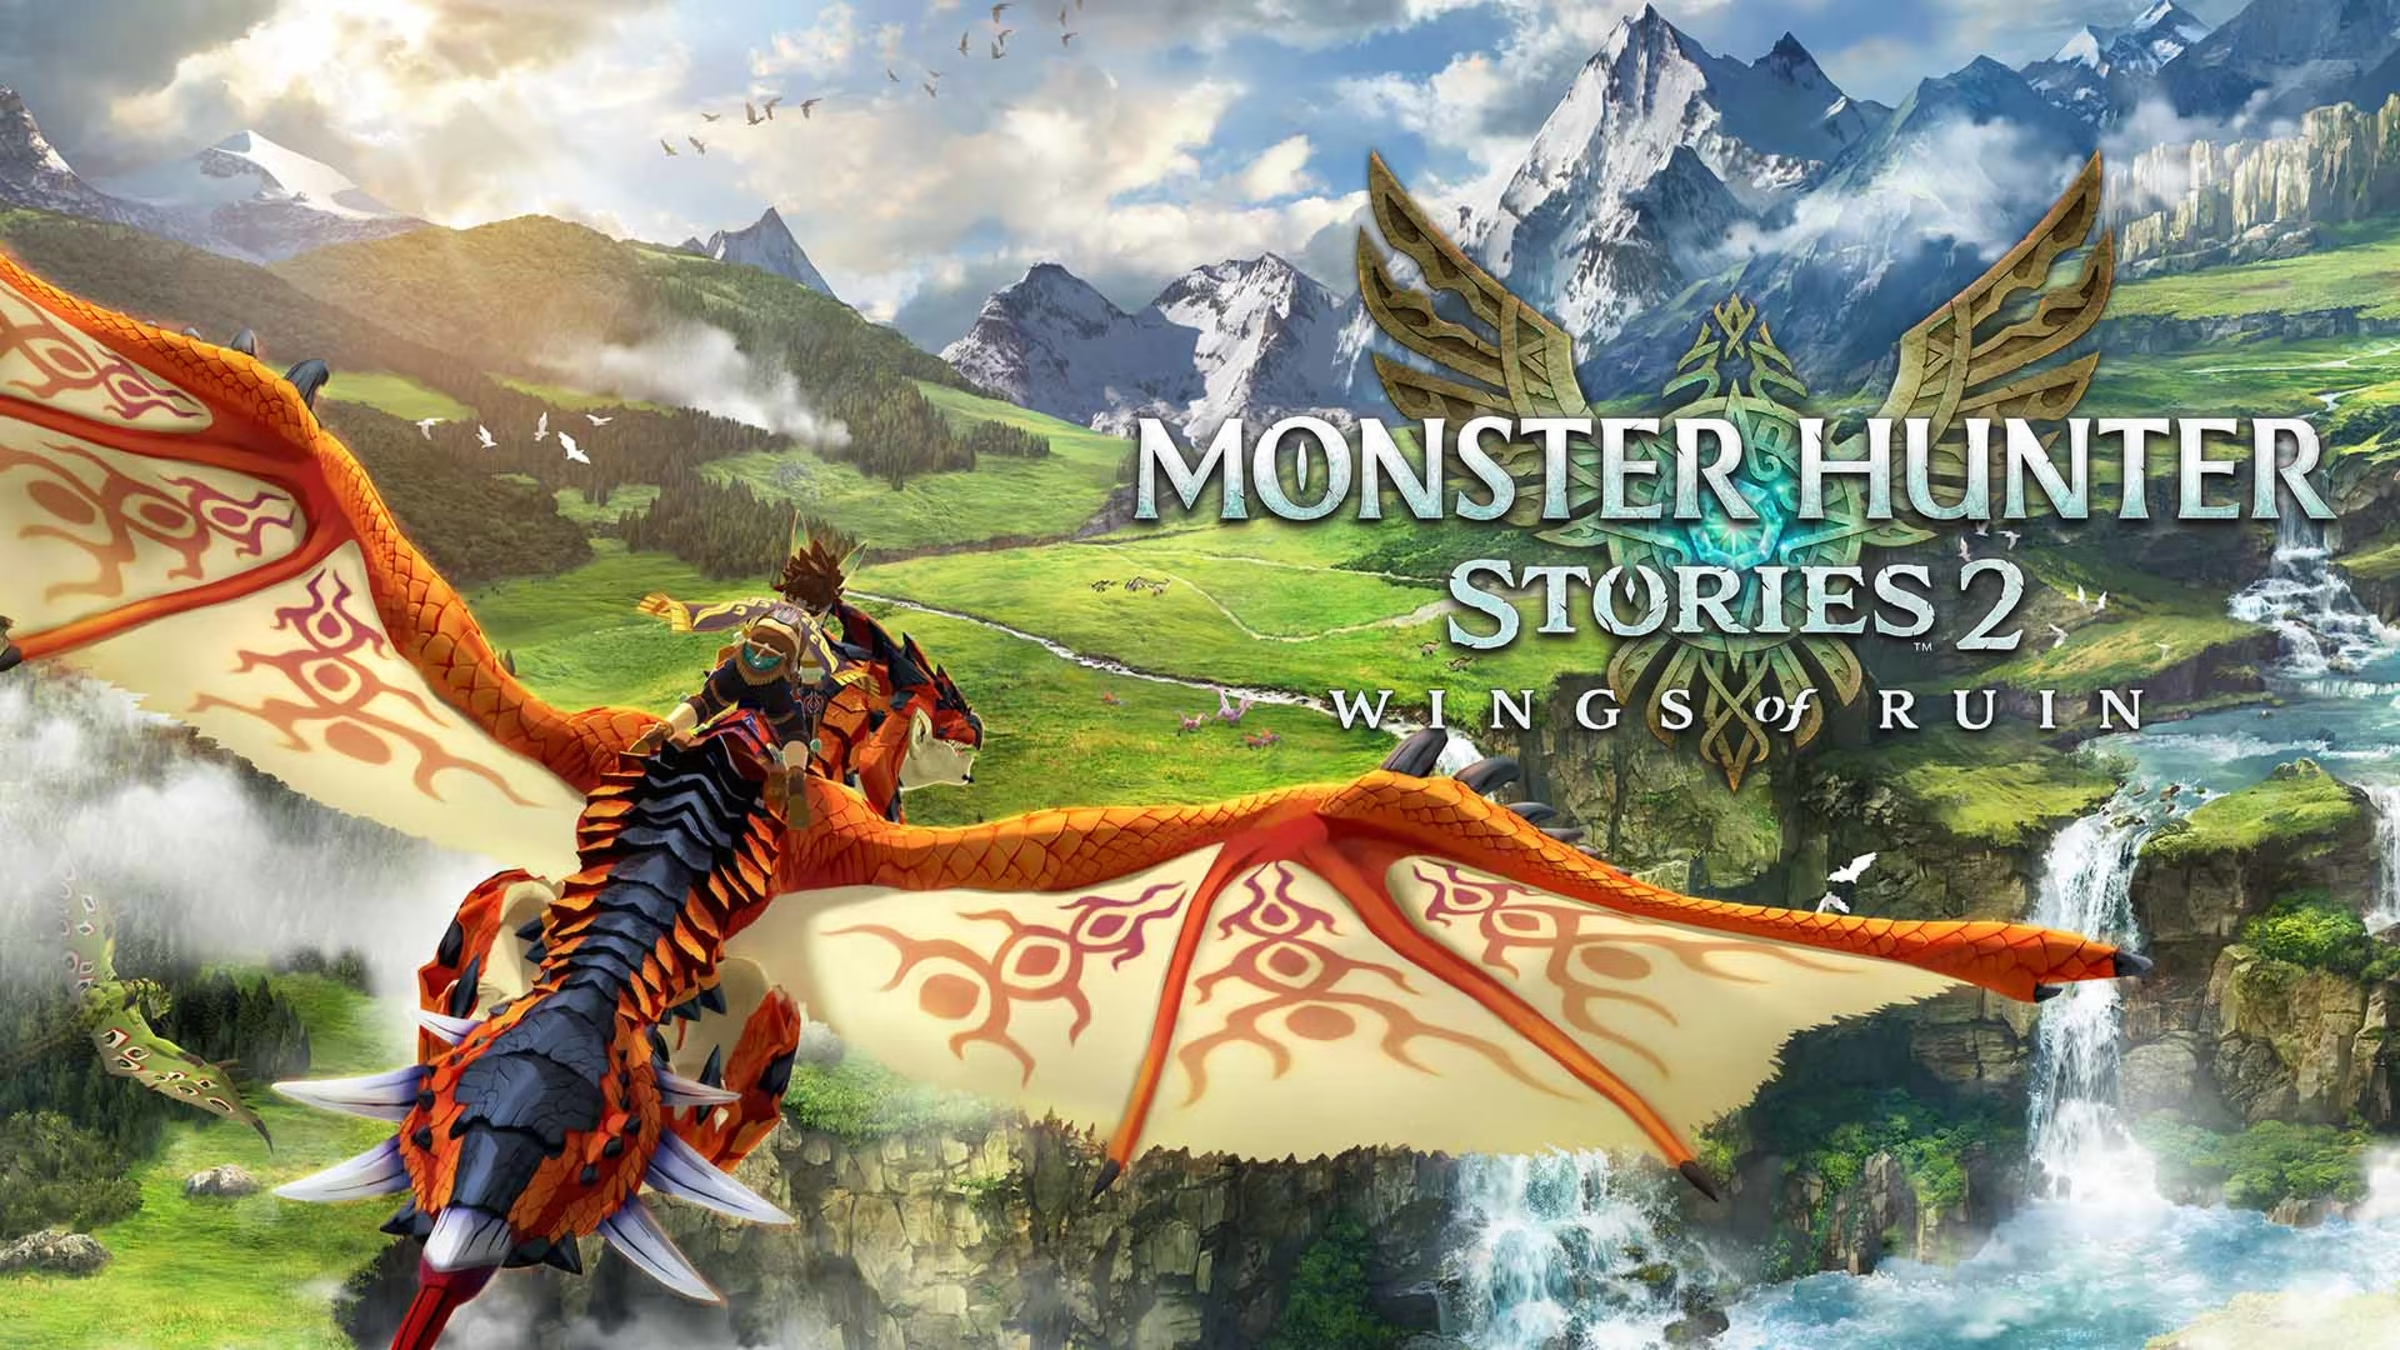 Total sales of Monster Hunter Stories 2: Wings of Ruin reached 2 million 